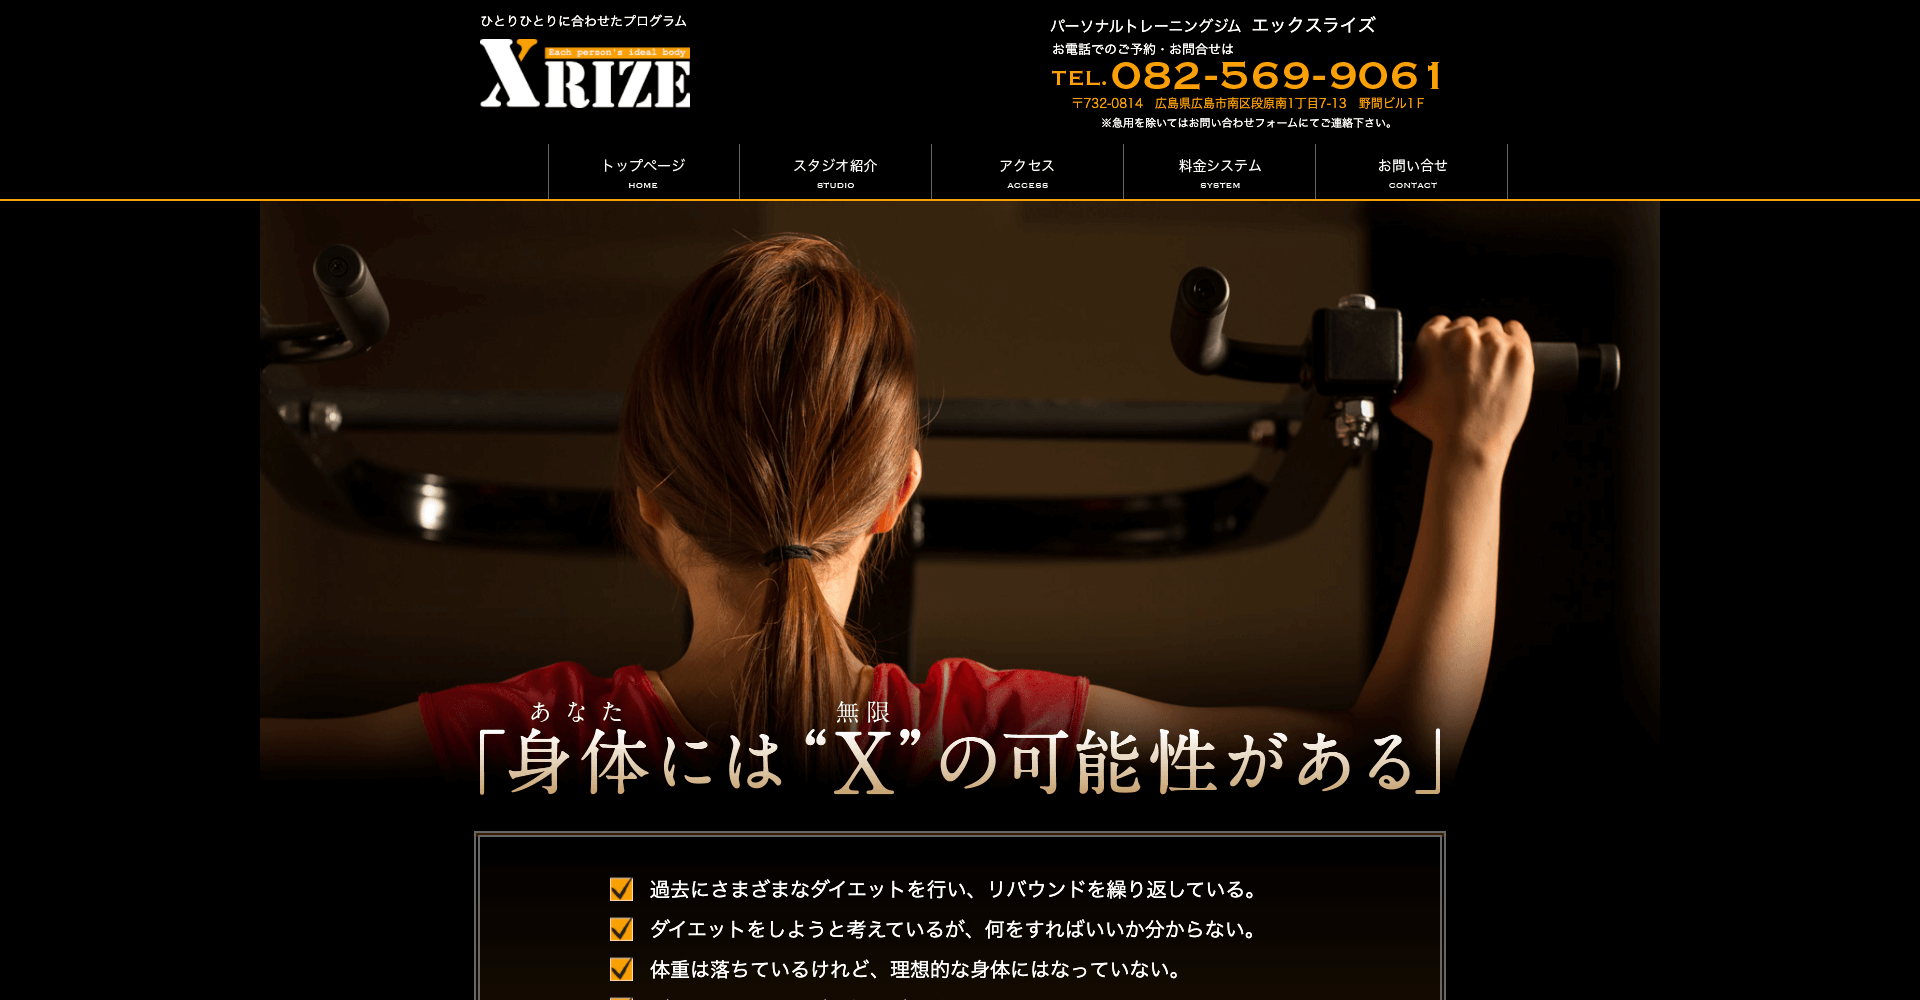 XRIZE